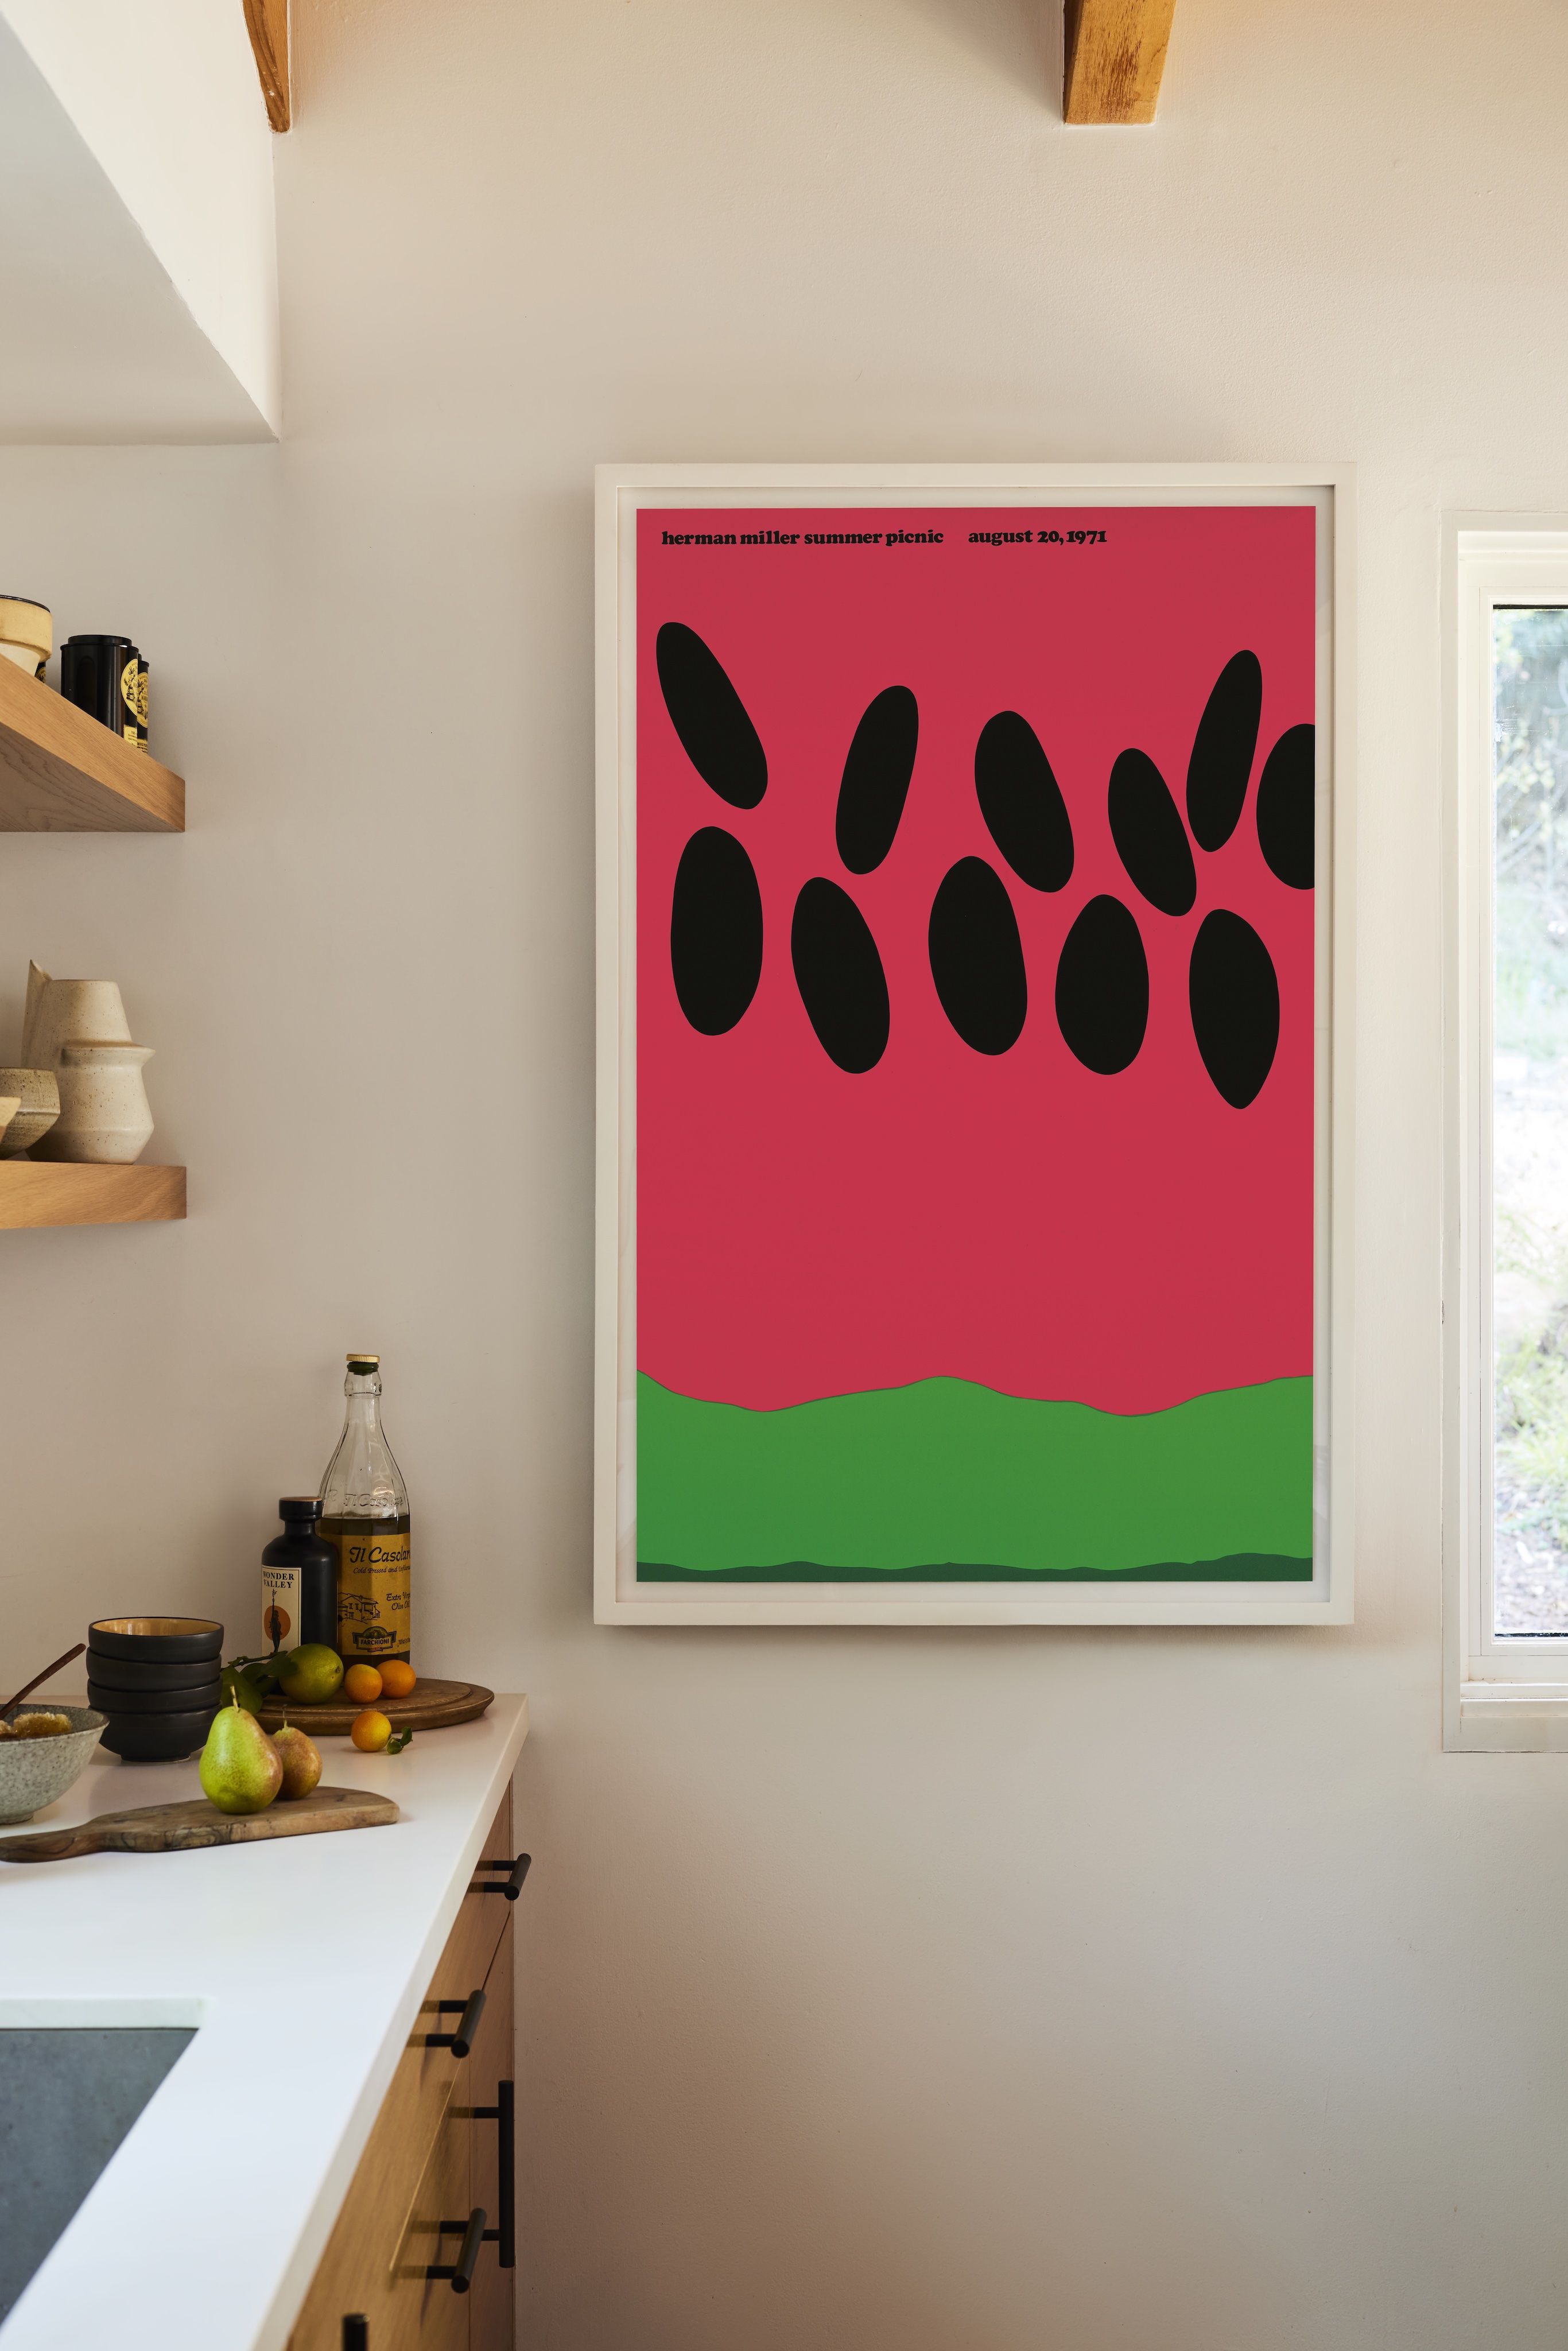 Iconic Herman Miller Watermelon Picnic Poster (1971) available as a limited run reprint